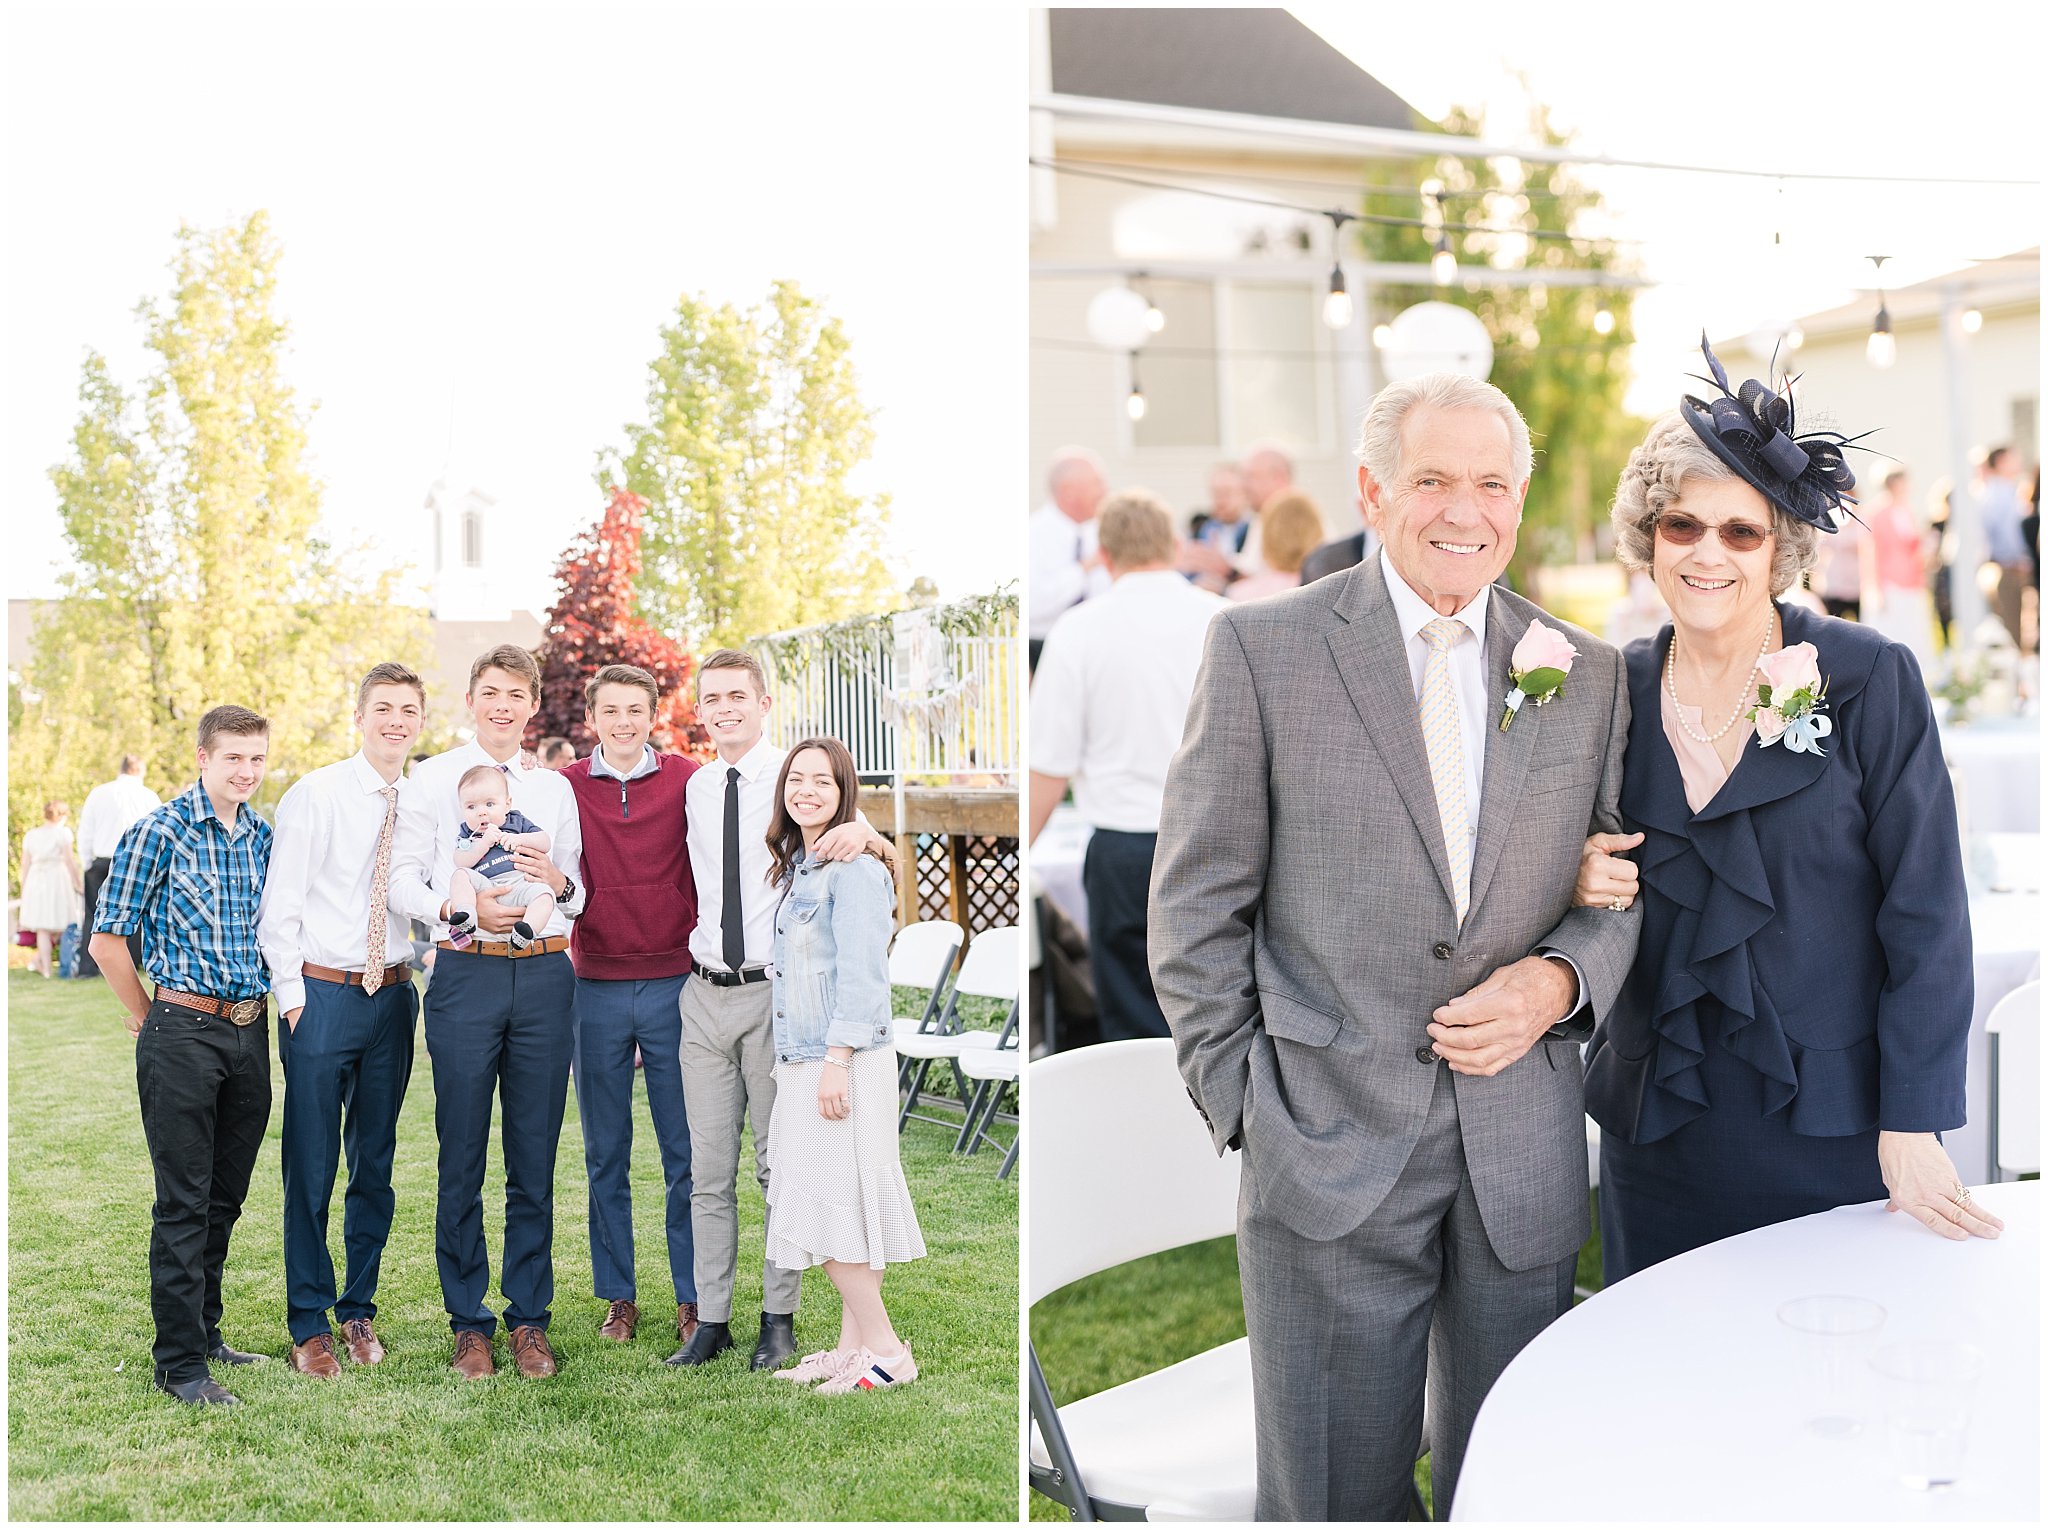 Wedding guests | Backyard outdoor spring wedding with grey, blush, and light blue wedding colors | Spring Provo City Center Temple Wedding | Utah Wedding Photographers | Jessie and Dallin Photography